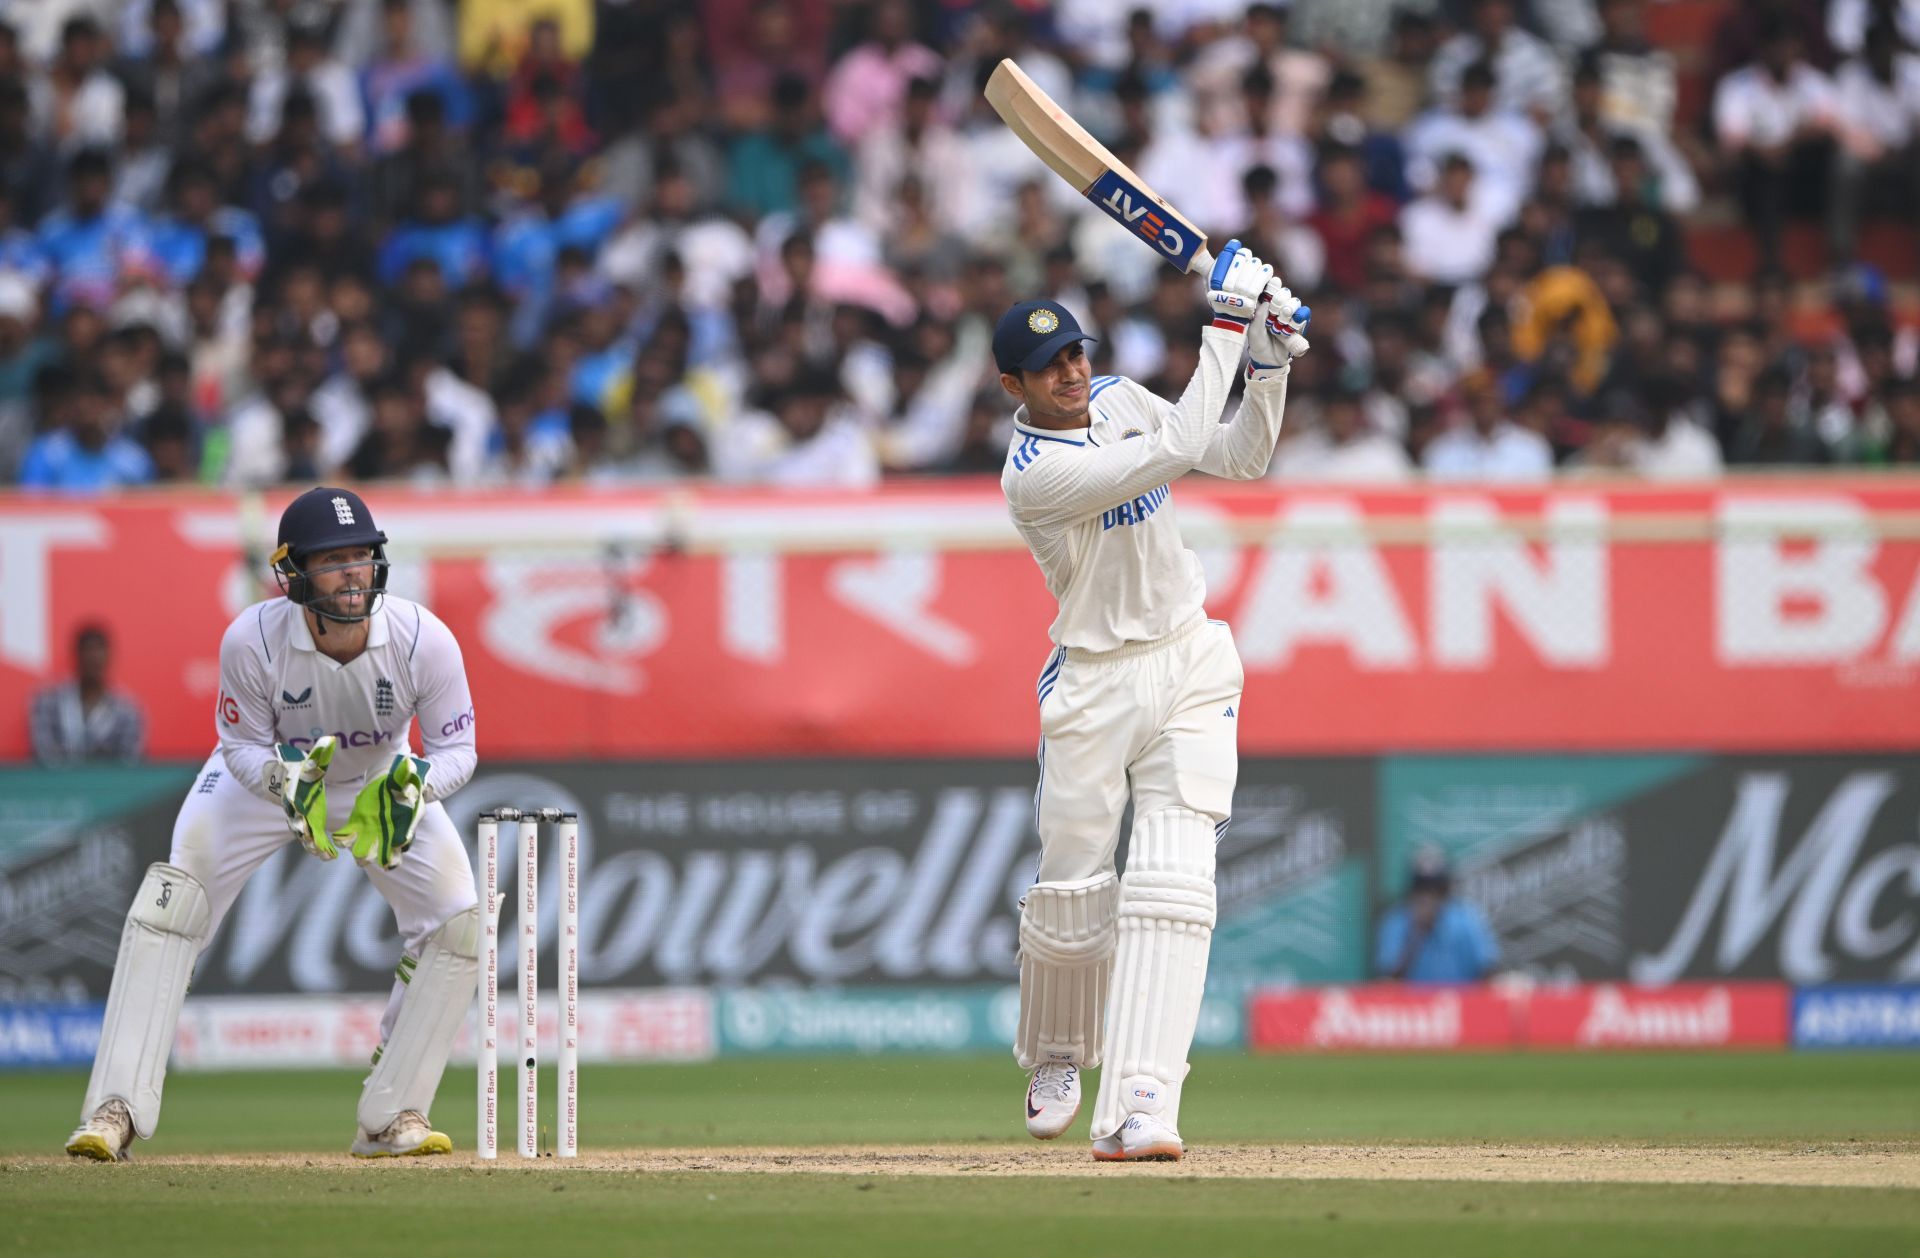 Shubman Gill was the only Indian batter to make a substantial contribution in the second innings of the second Test. [P/C: BCCI]